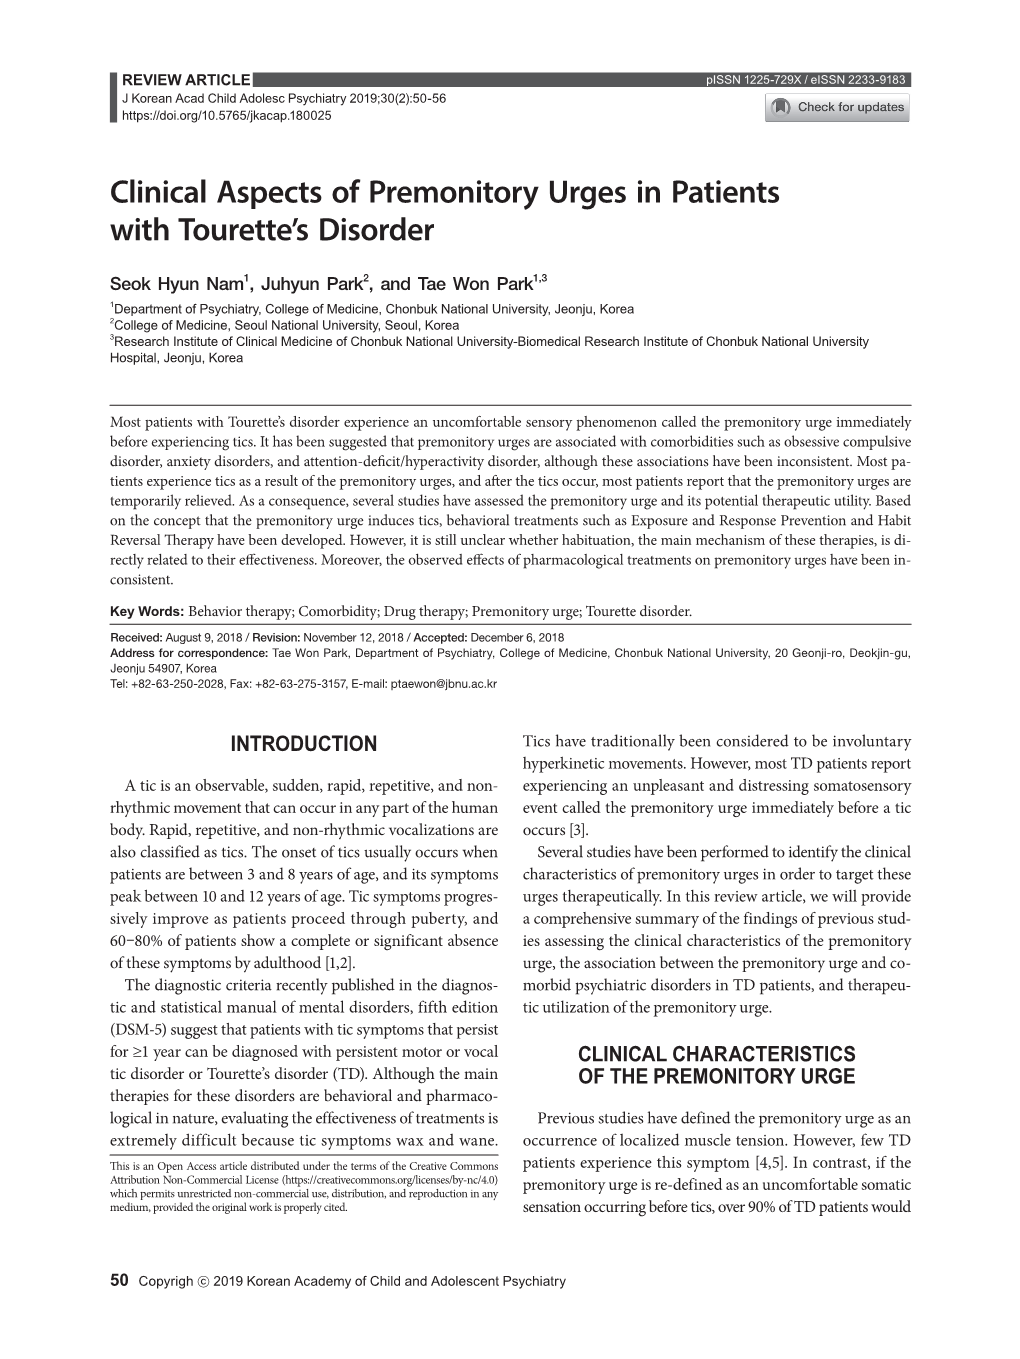 Clinical Aspects of Premonitory Urges in Patients with Tourette's Disorder